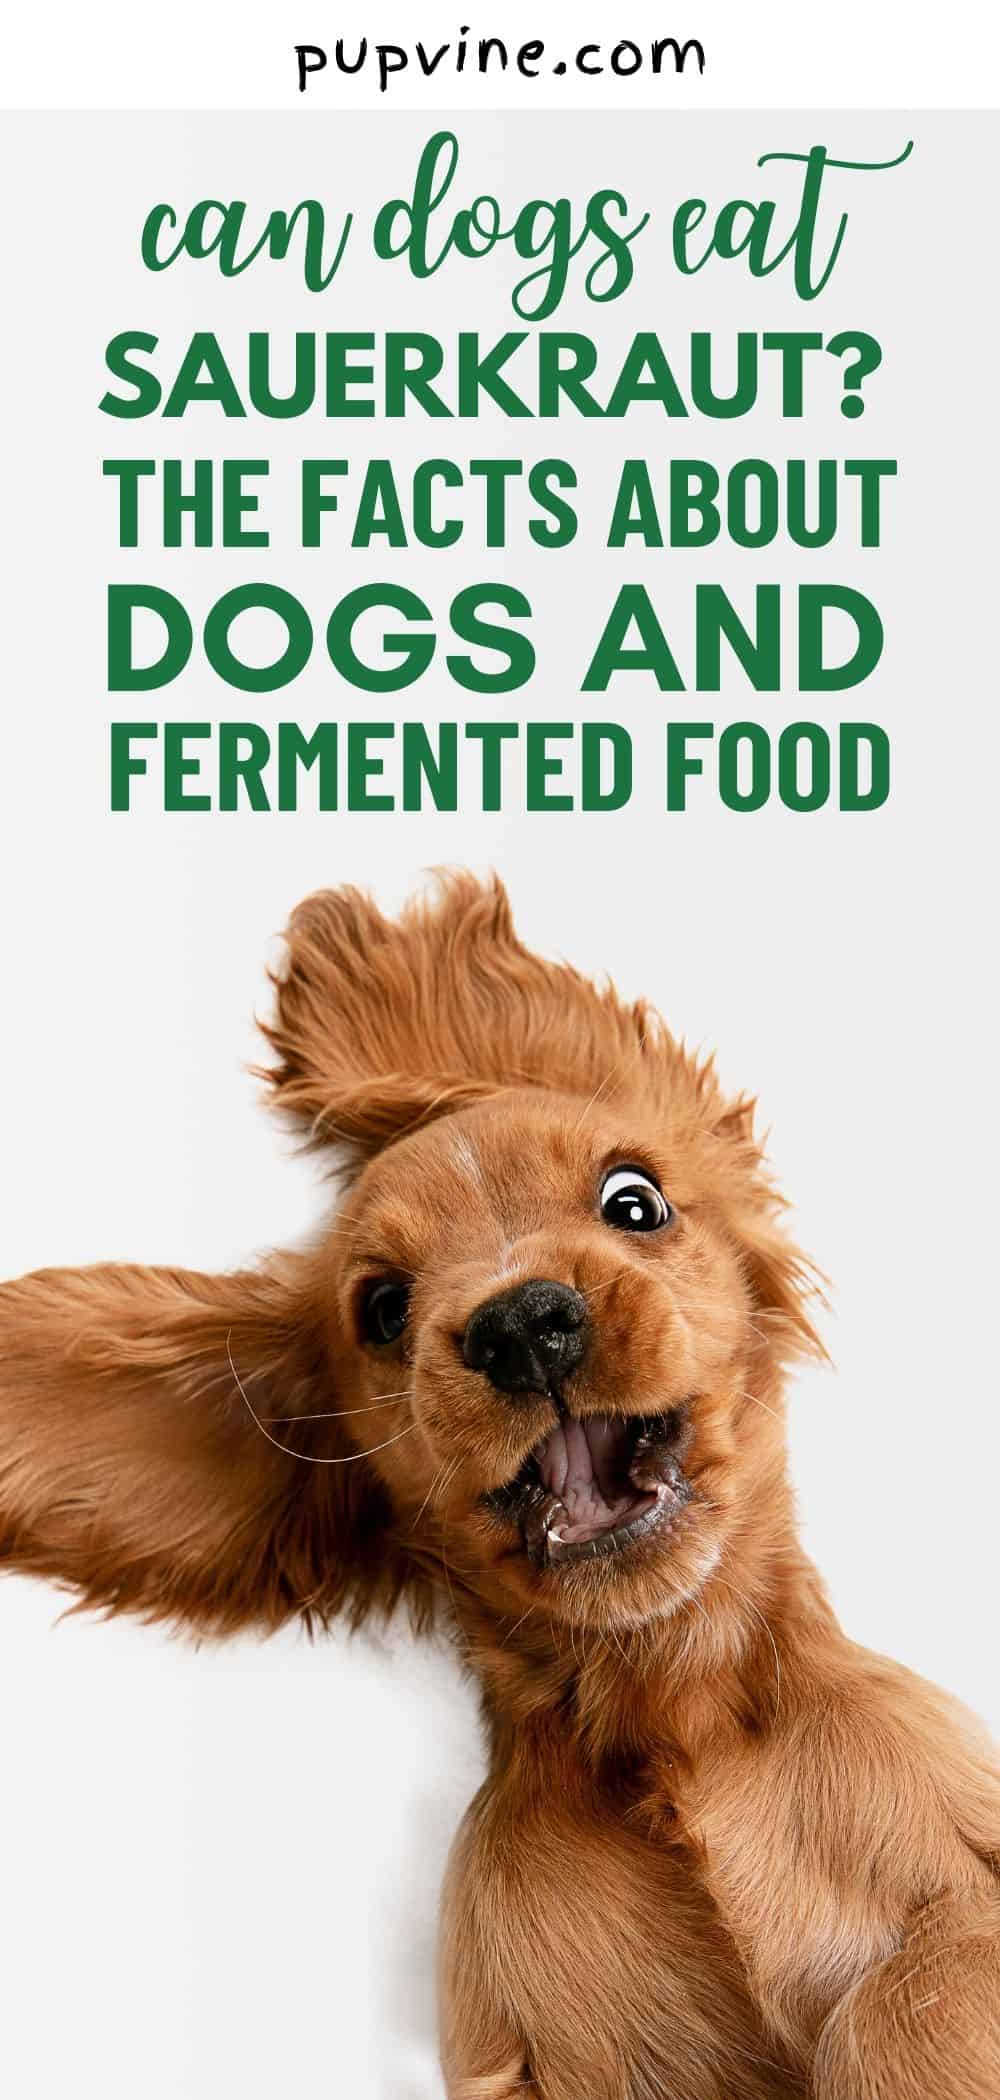 Can Dogs Eat Sauerkraut? The Facts About Dogs And Fermented Food